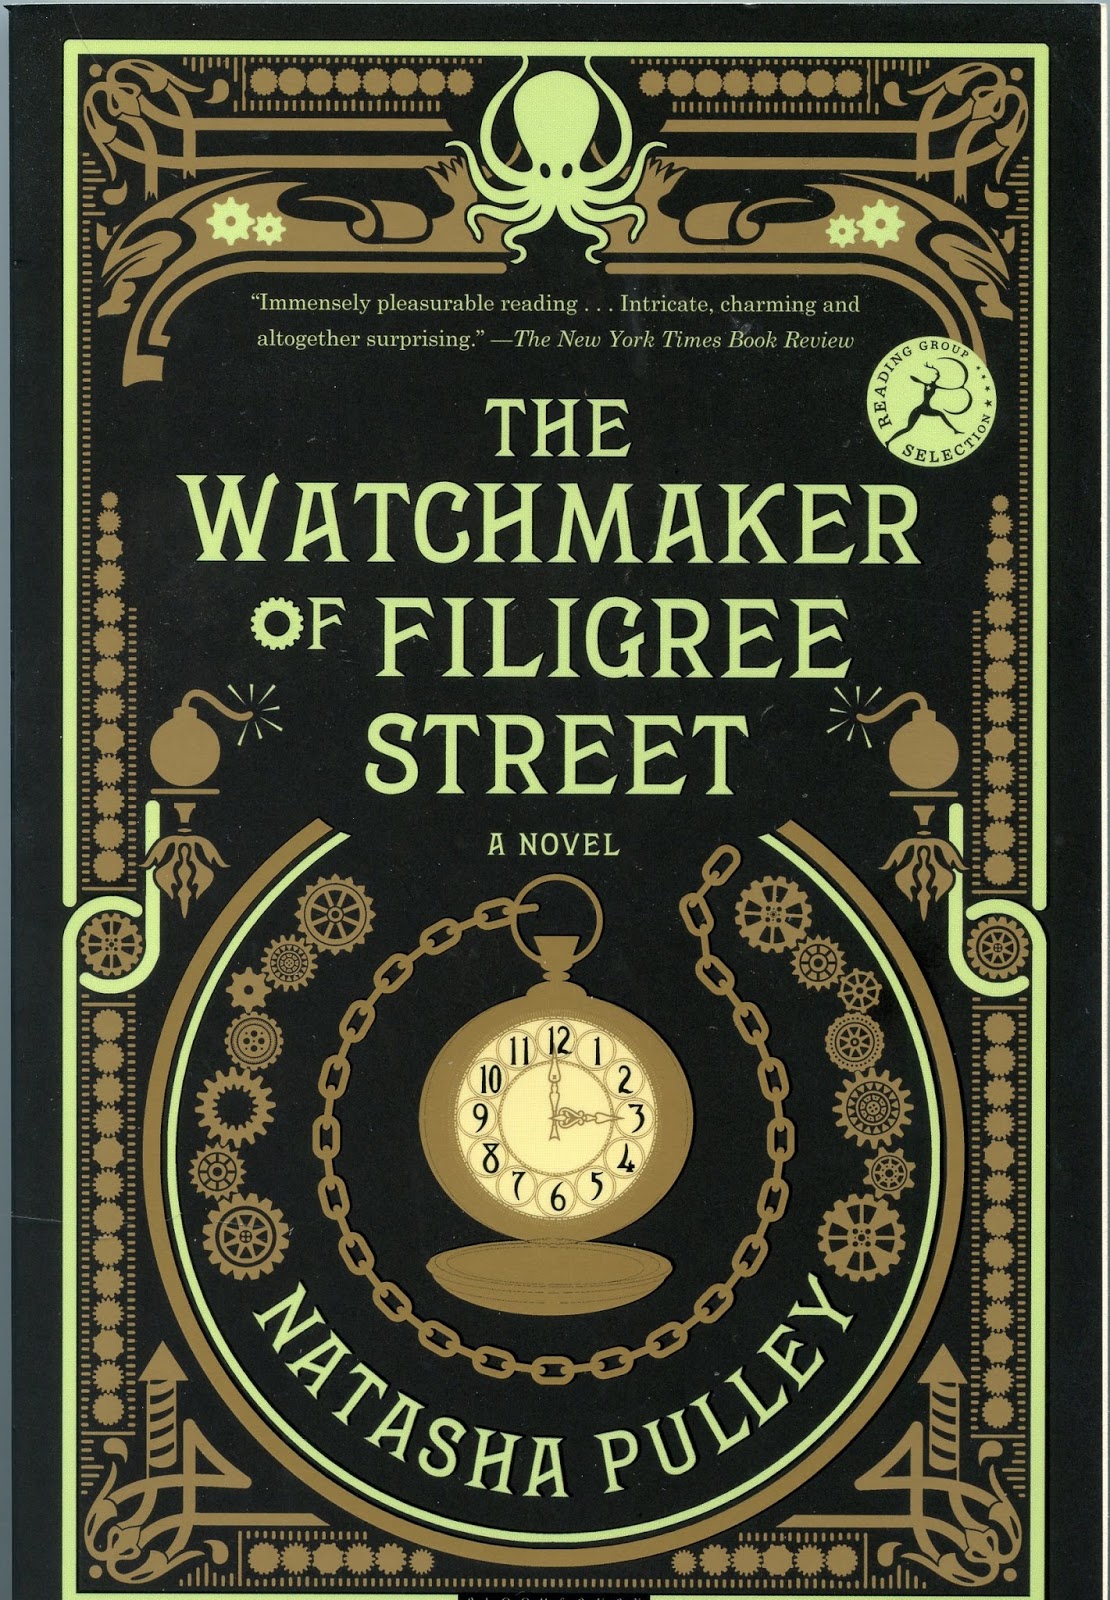 the watchmaker of filigree street by natasha pulley